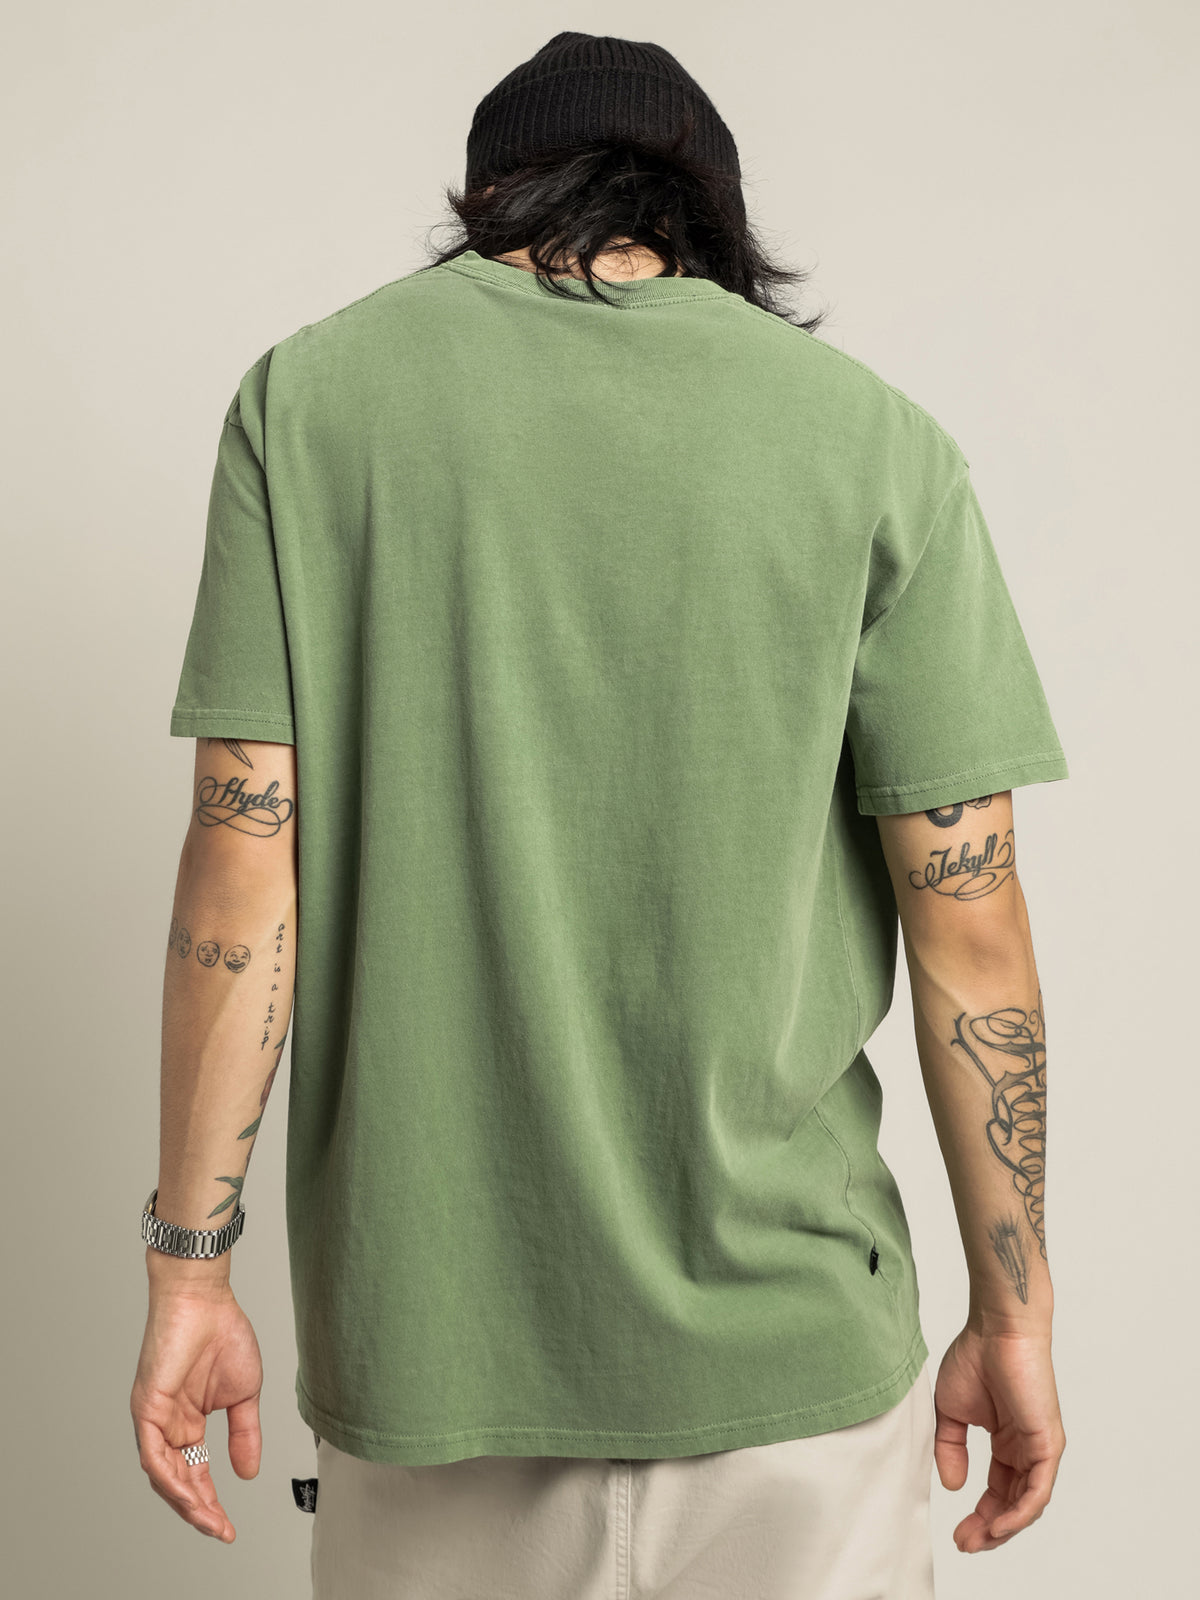 Shadow Stock T-Shirt in Pigment Basil